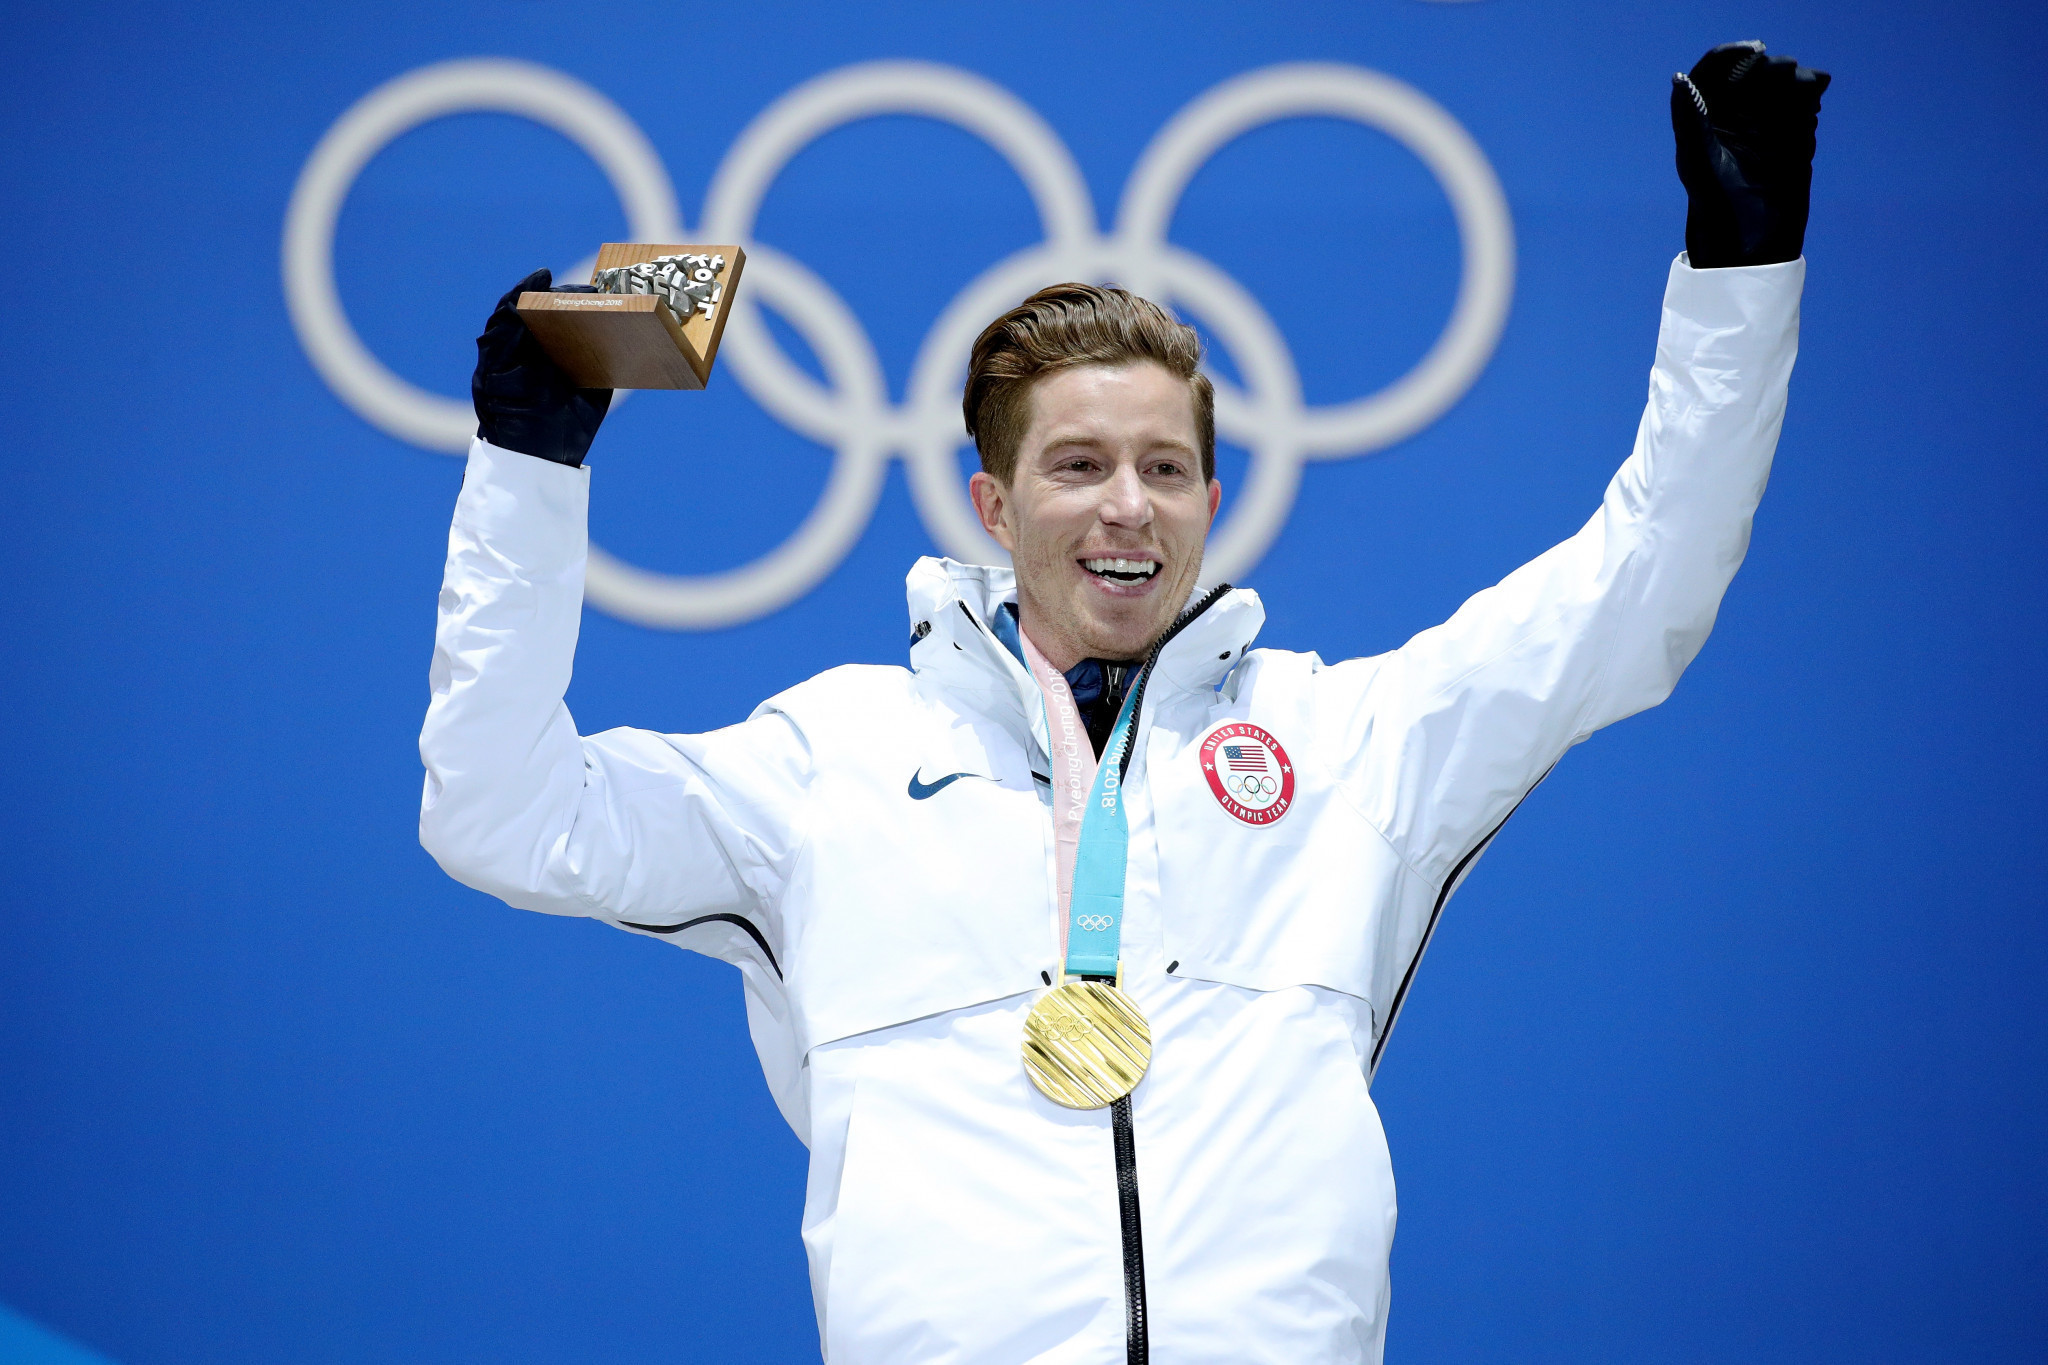 Shaun White has won three halfpipe snowboard gold medals at the Winter Olympics for the United States ©Getty Images